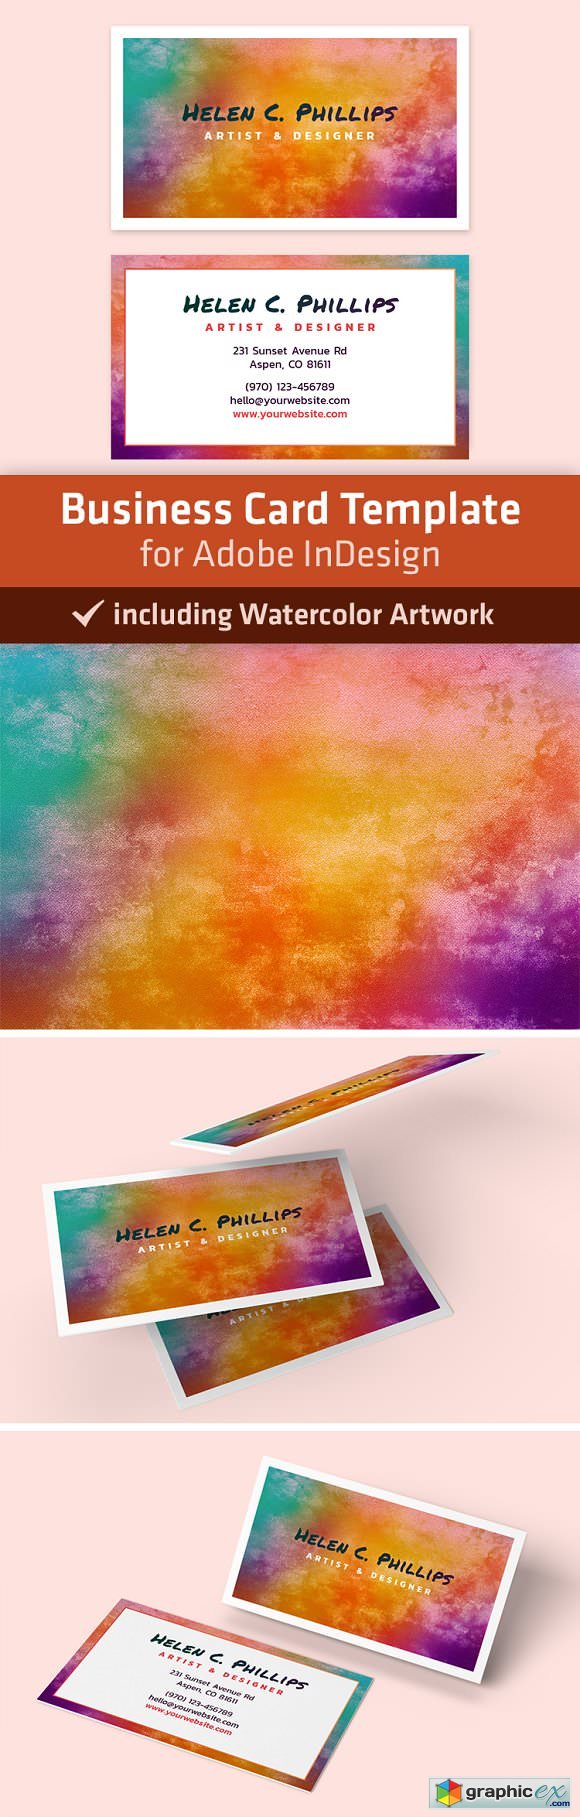 Watercolor Business Card Template 01